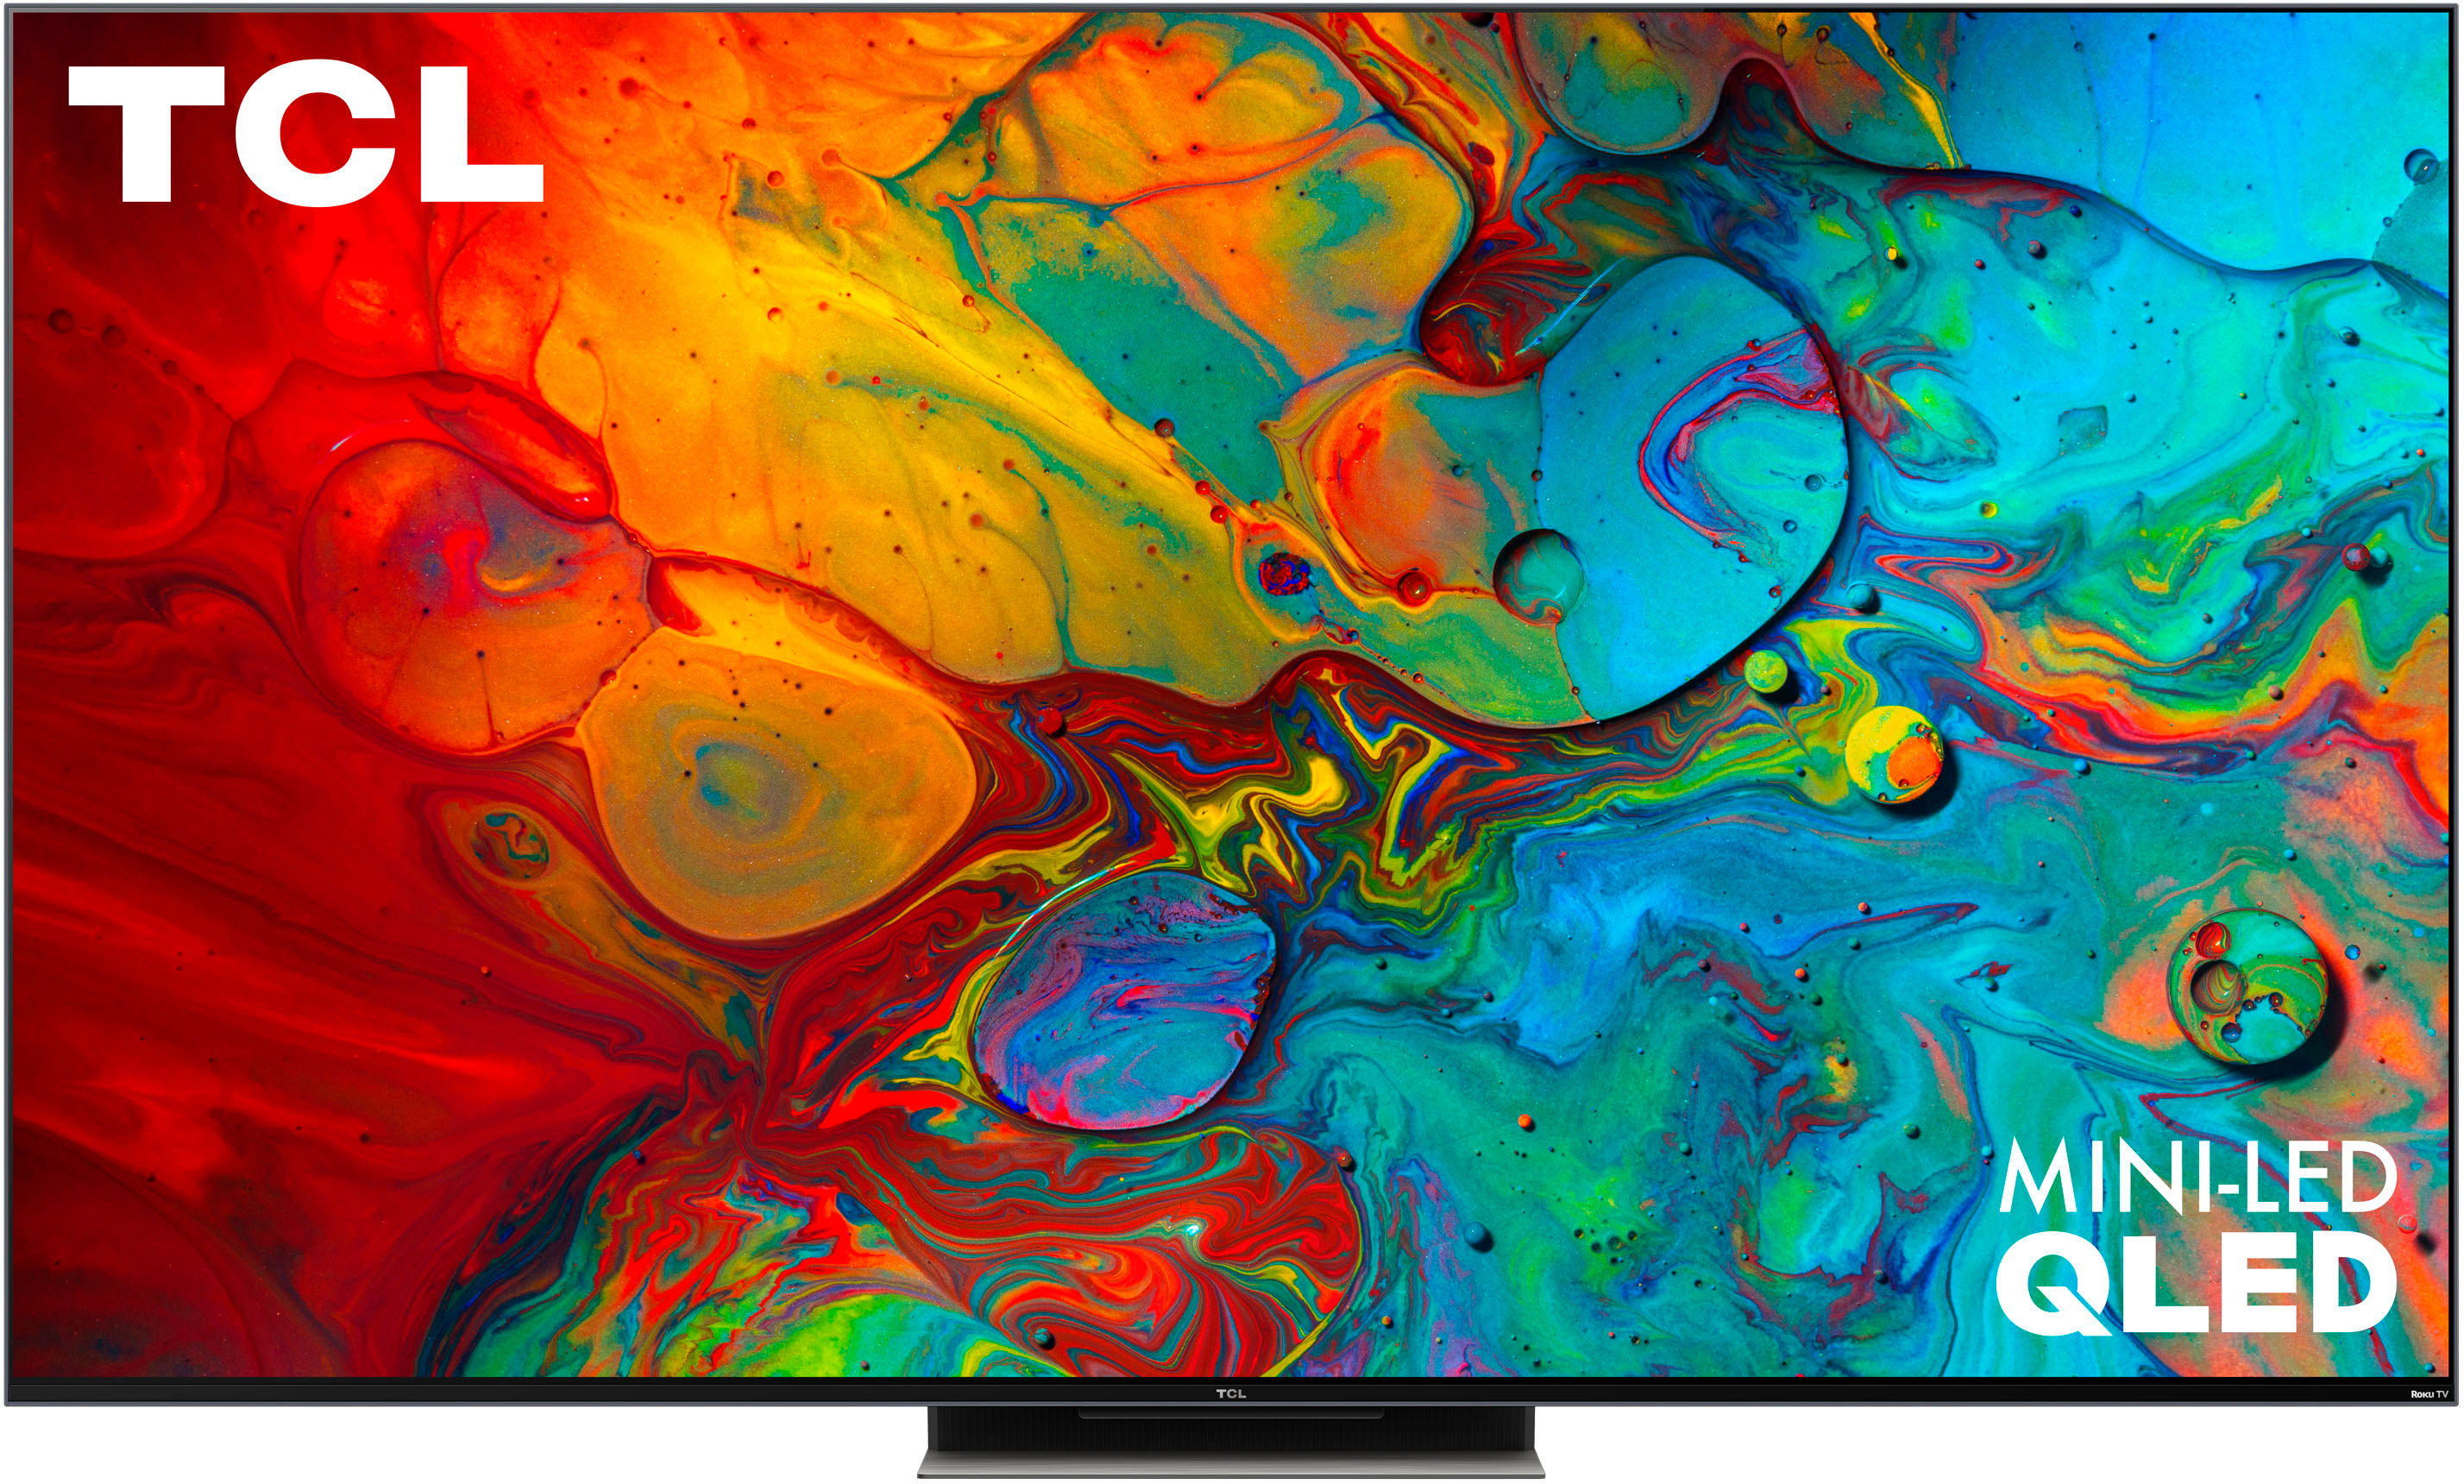 A 65-inch mini-LED TV for under £1,000 and it's not even Black Friday yet?  Yes please, TCL